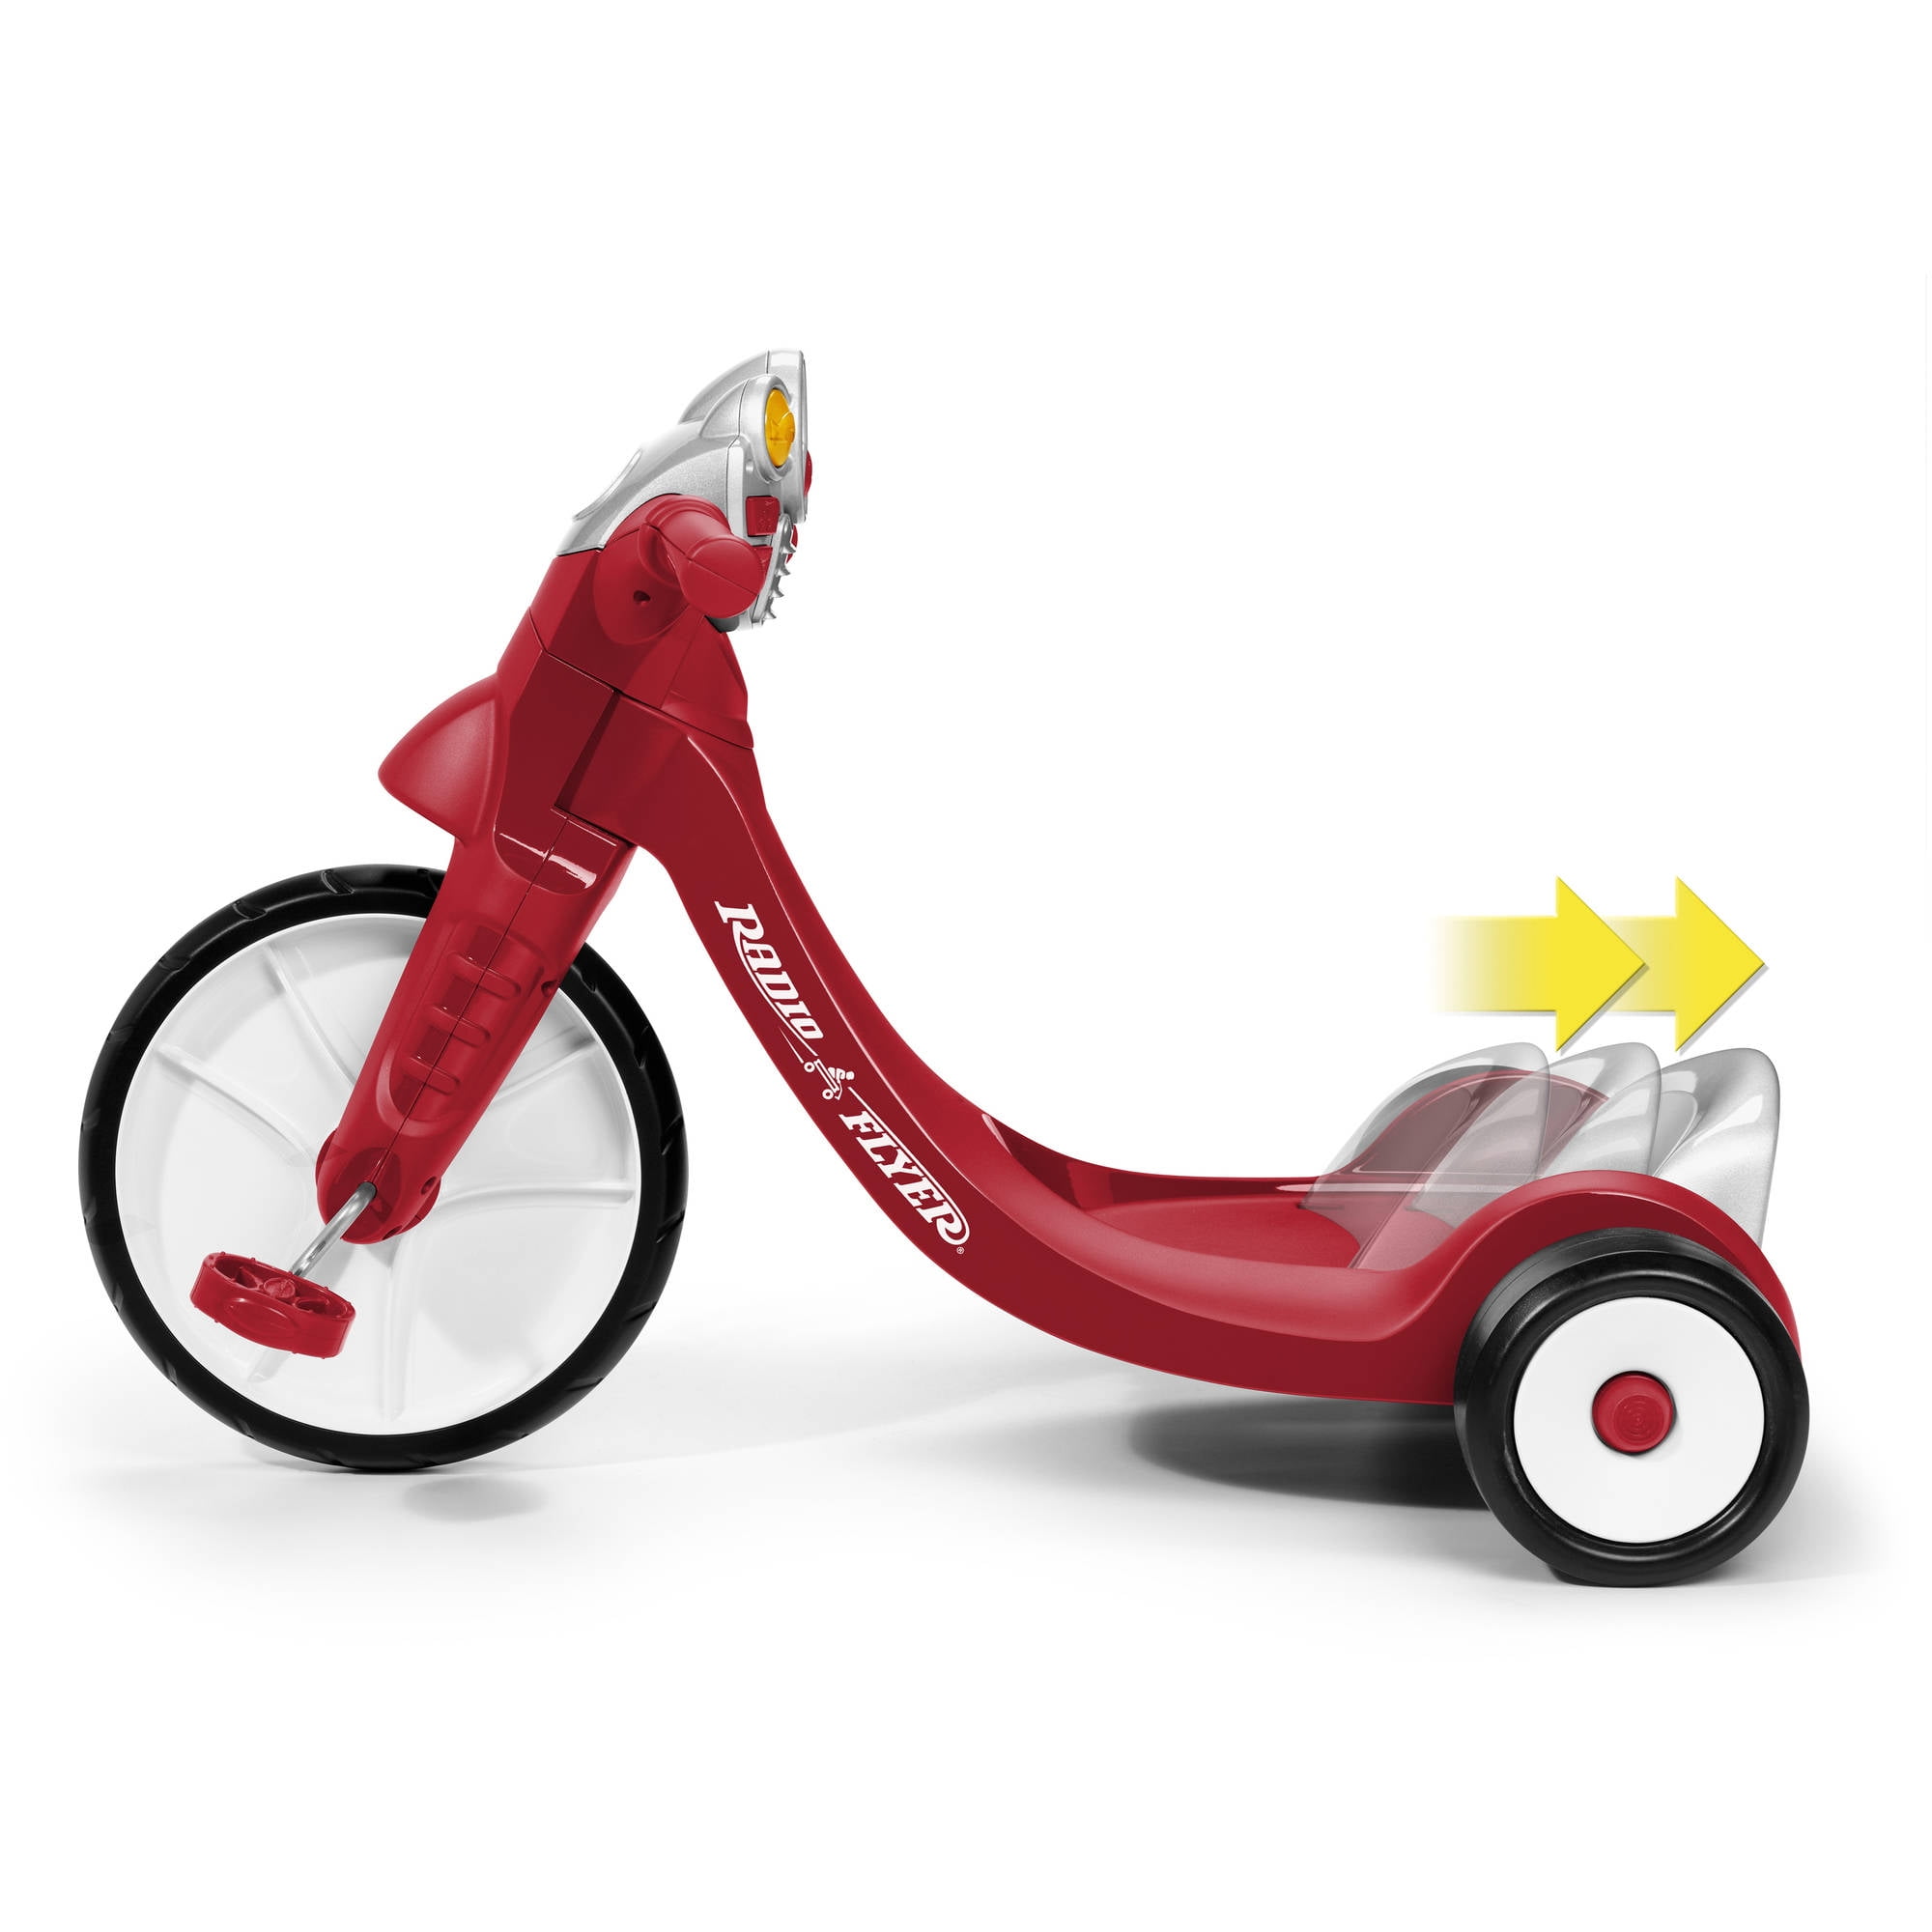 Radio Flyer, Lights & Sounds Racer, Tricycle, Red - 2